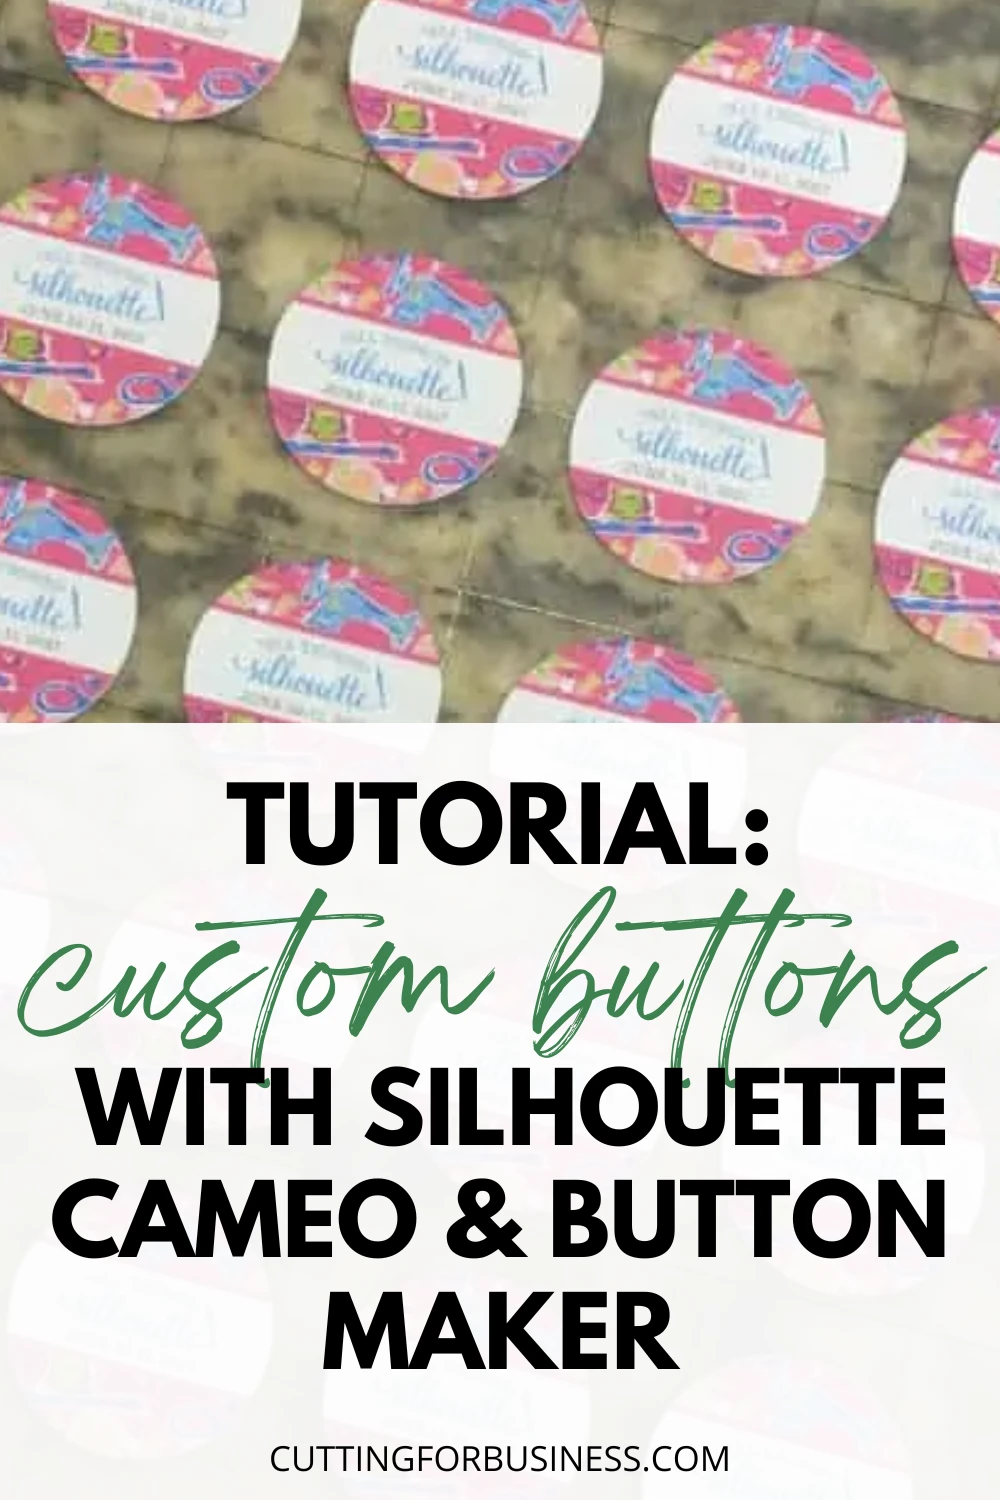 Print and Cut Tutorial: Creating Product Labels with a Silhouette Cameo 3 